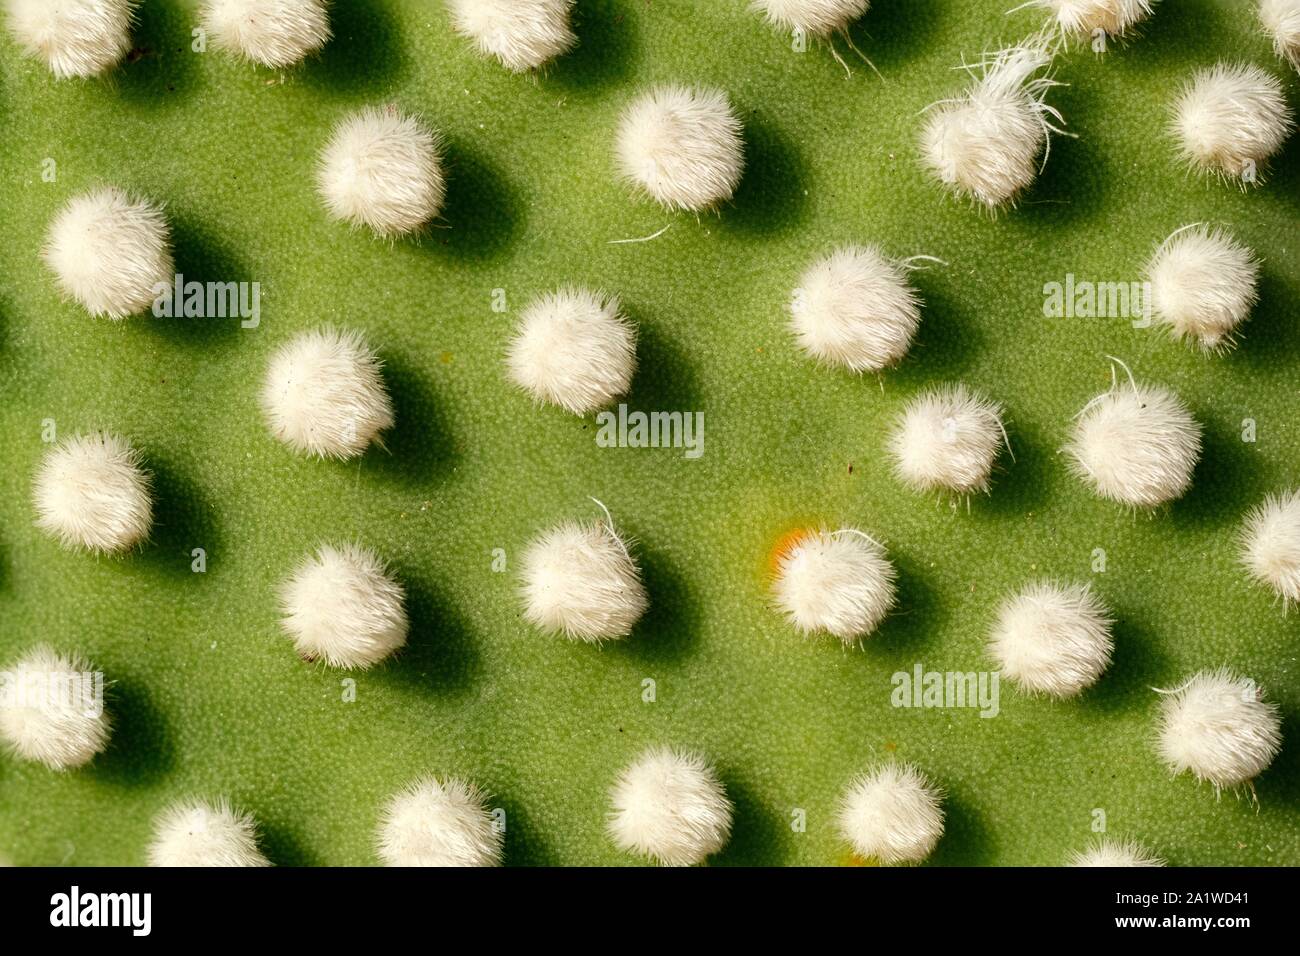 Close up of cactus leaf with green leaf and white spikes Stock Photo